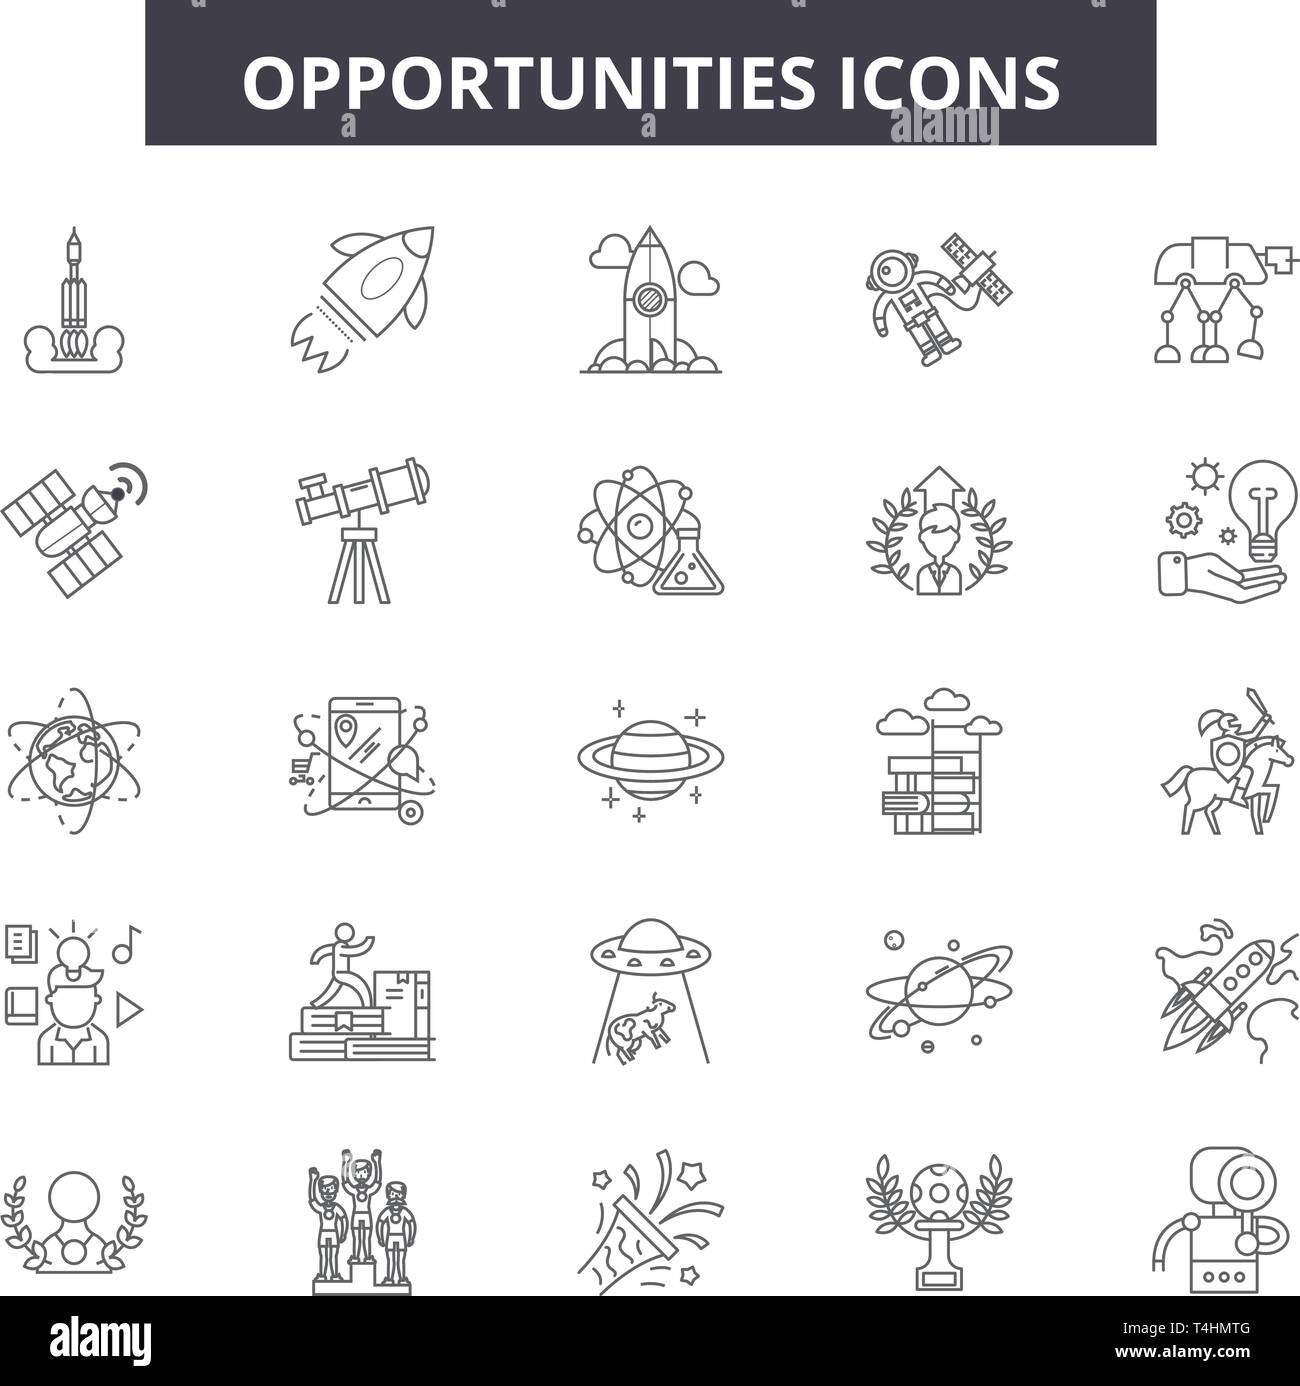 Great Deal Icon, Vector Illustration Royalty Free SVG, Cliparts, Vectors,  and Stock Illustration. Image 15559570.